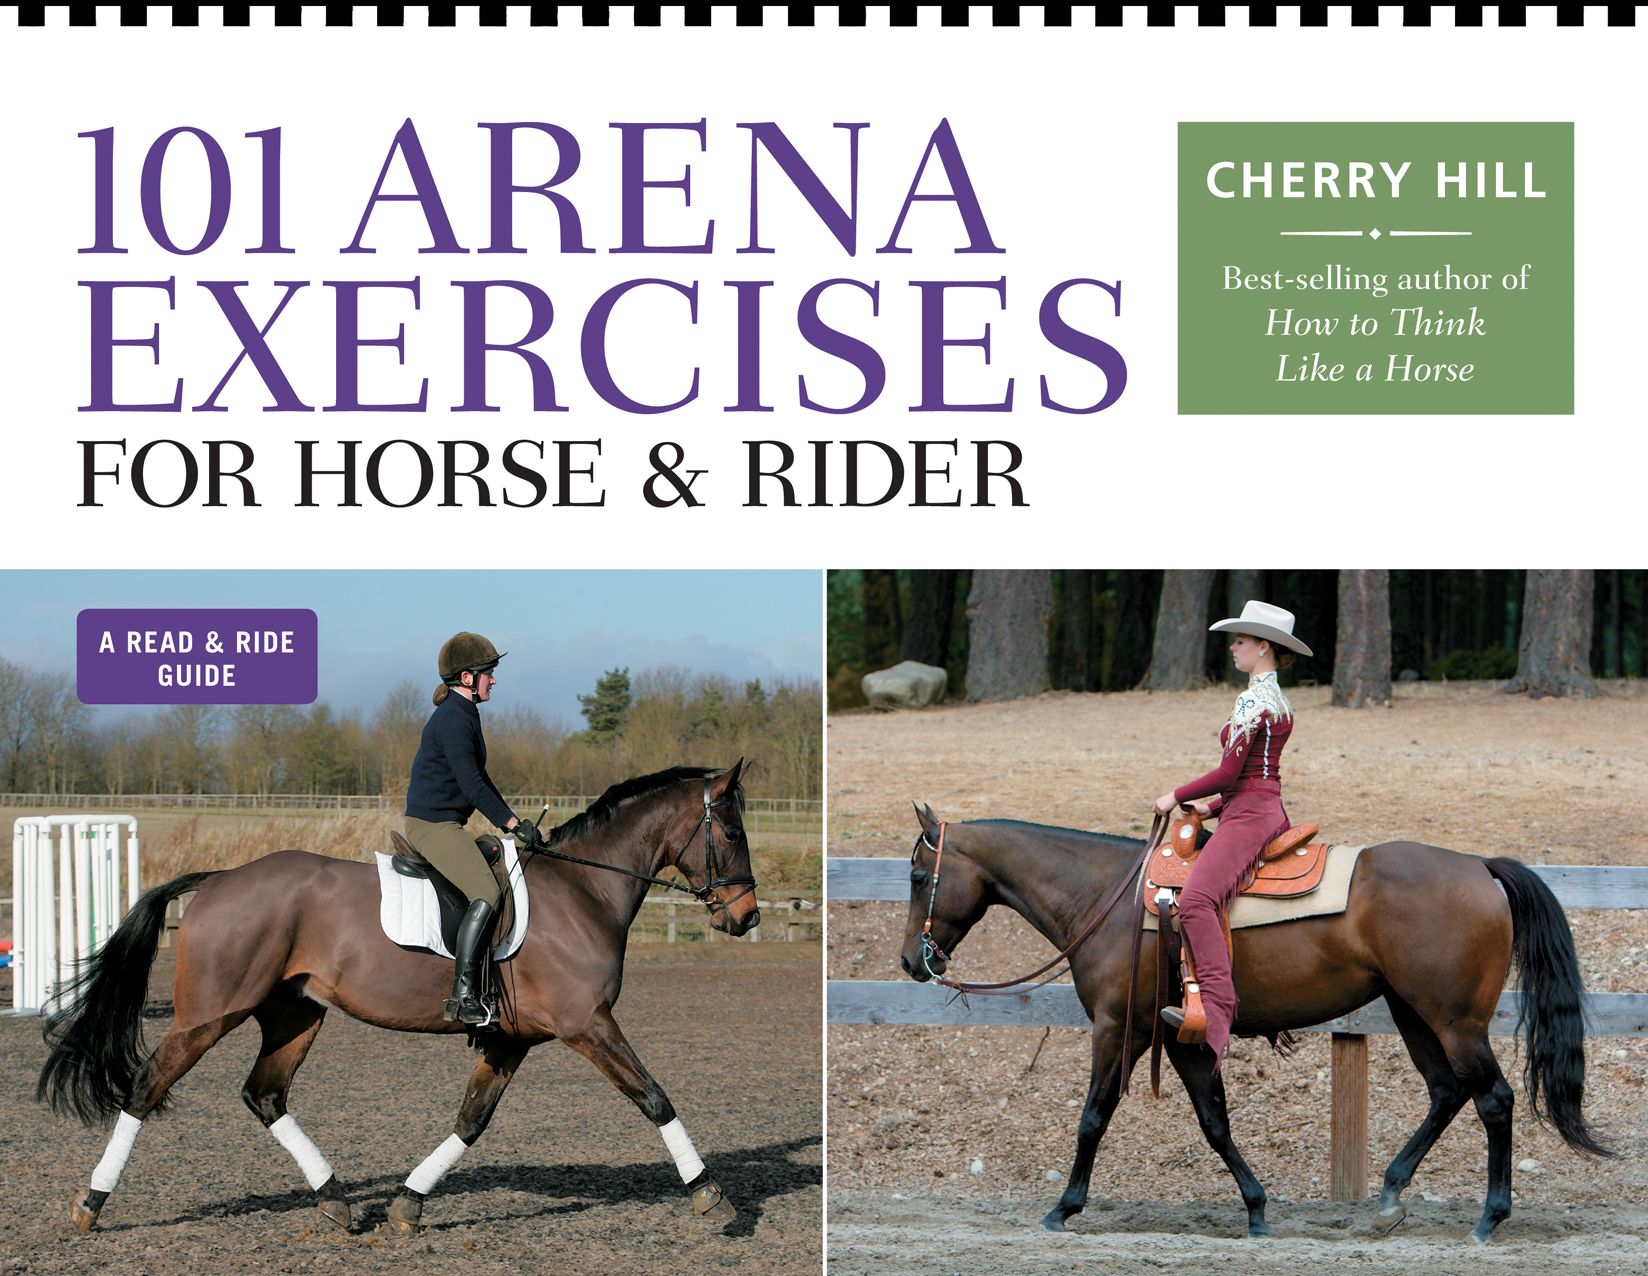 15 Minute Workouts For Equestrian Riders with Comfort Workout Clothes